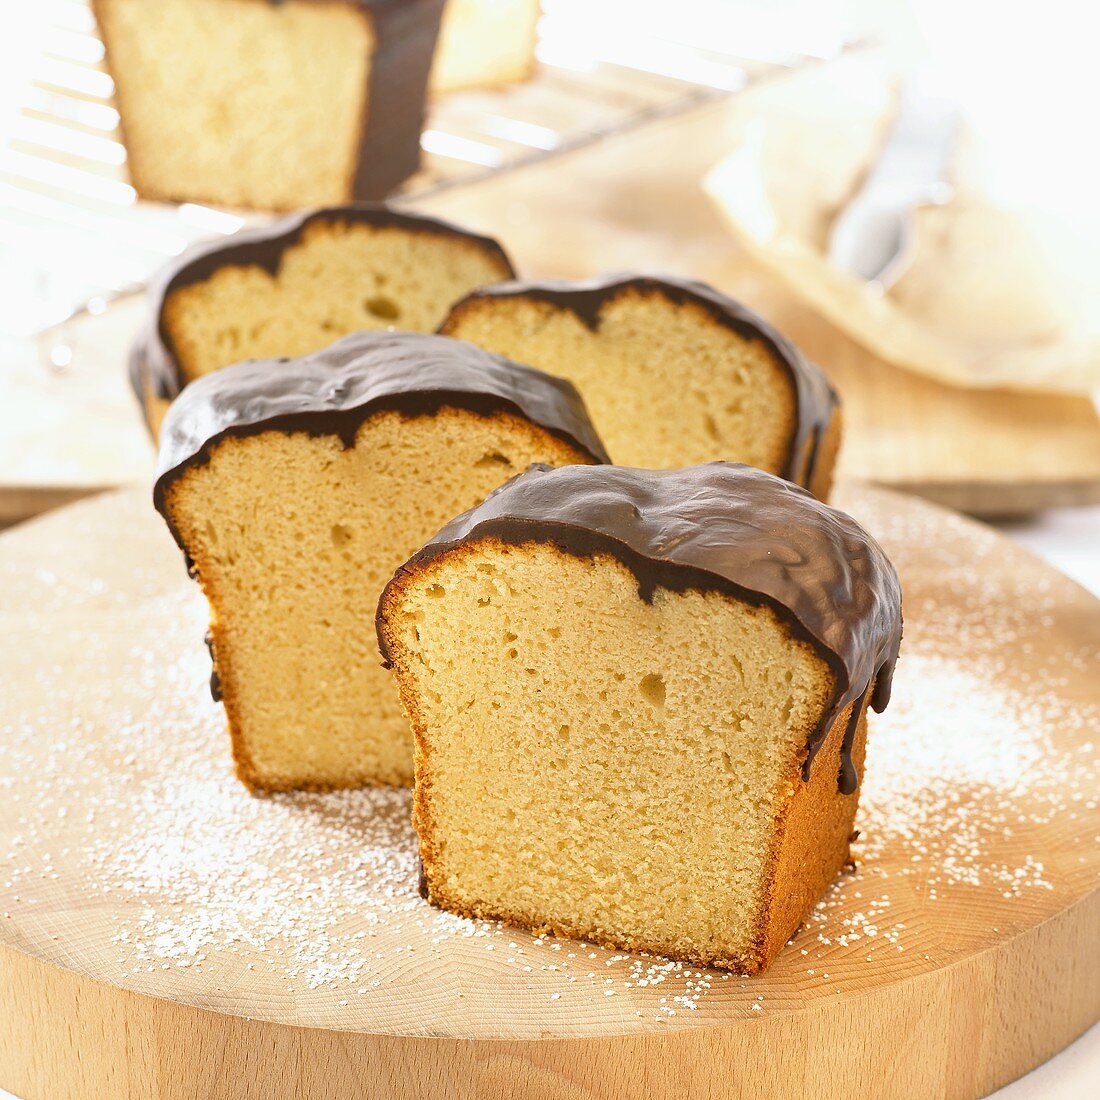 Madeira cake with chocolate icing, cut into pieces